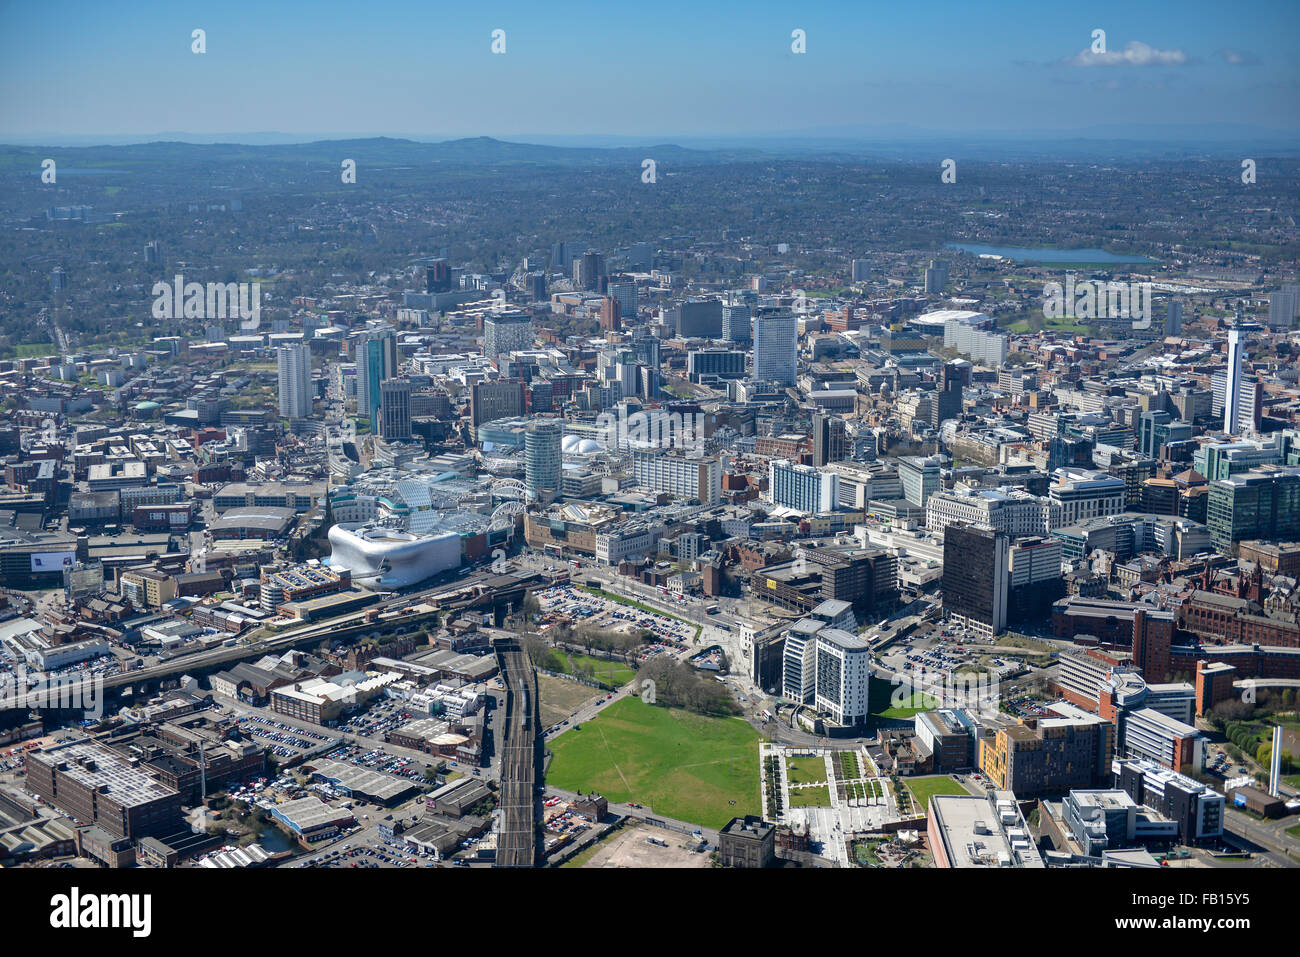 An aerial view the City Centre of Birmingham in the West Midlands, UK Stock Photo